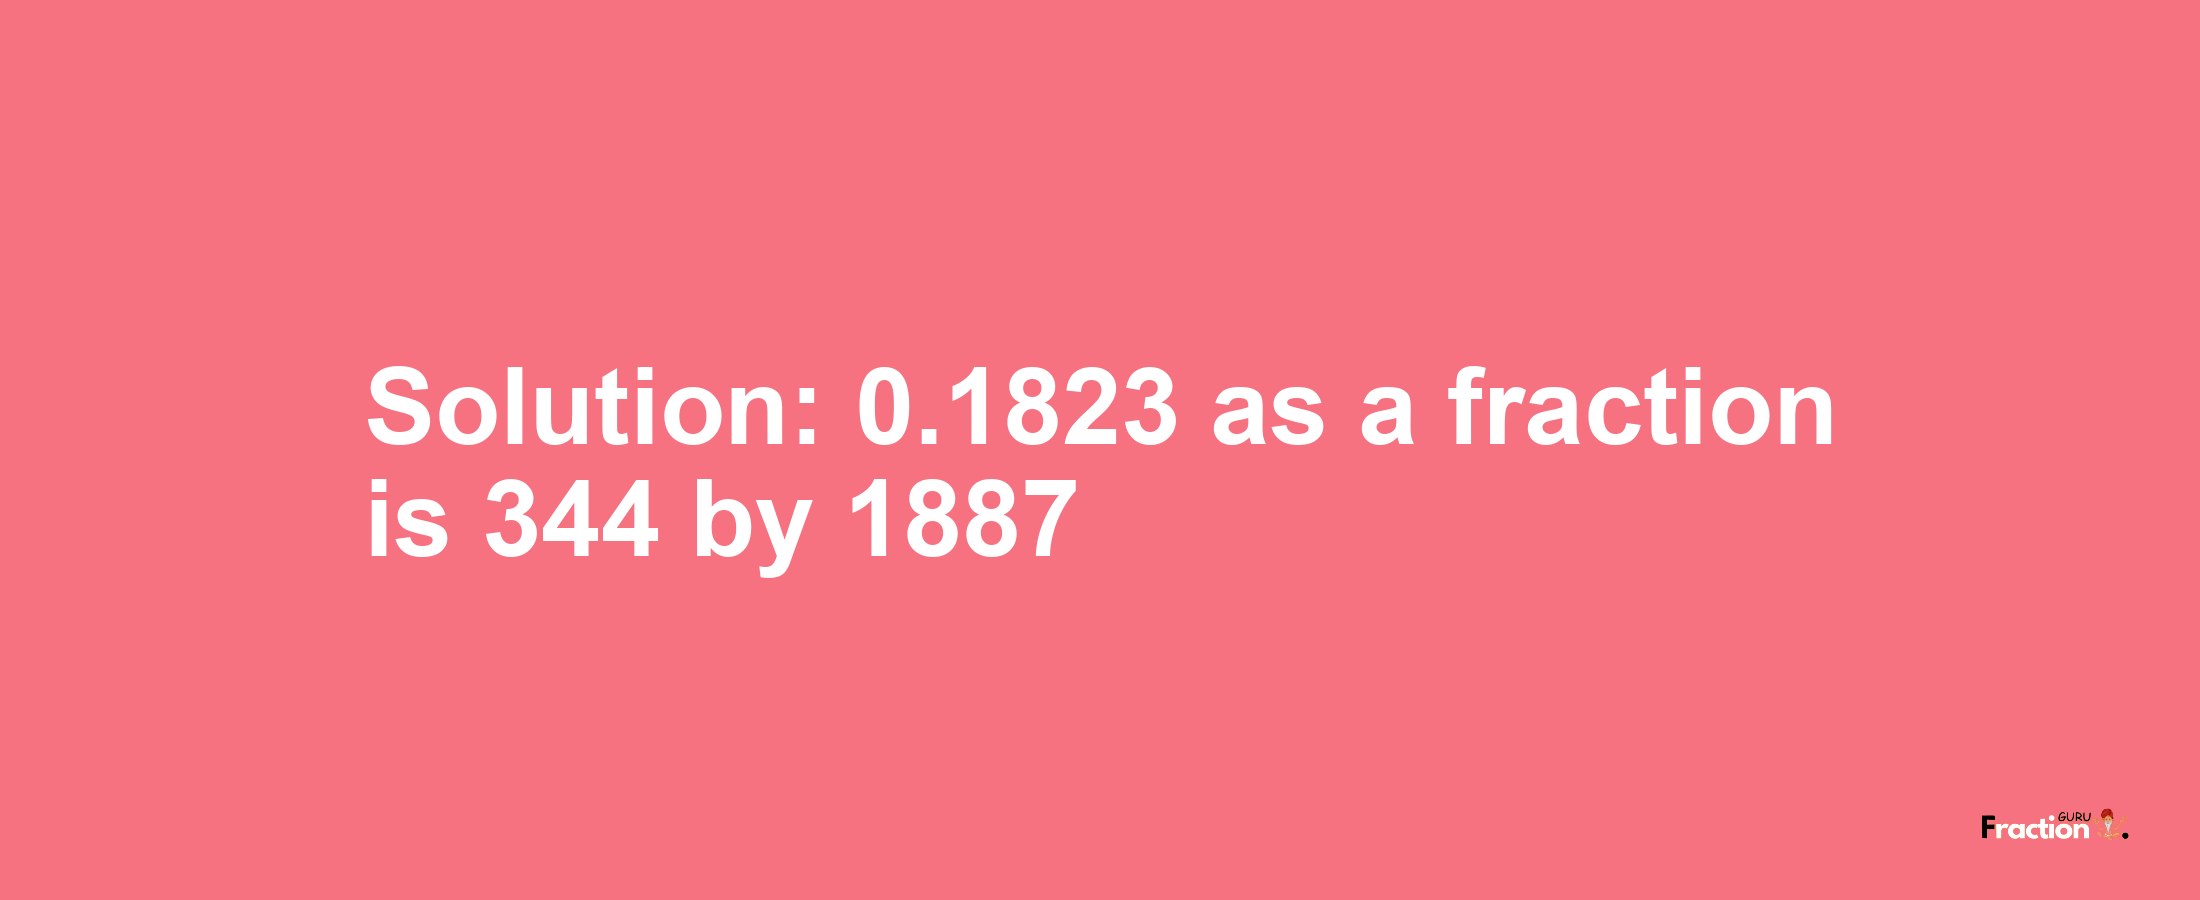 Solution:0.1823 as a fraction is 344/1887